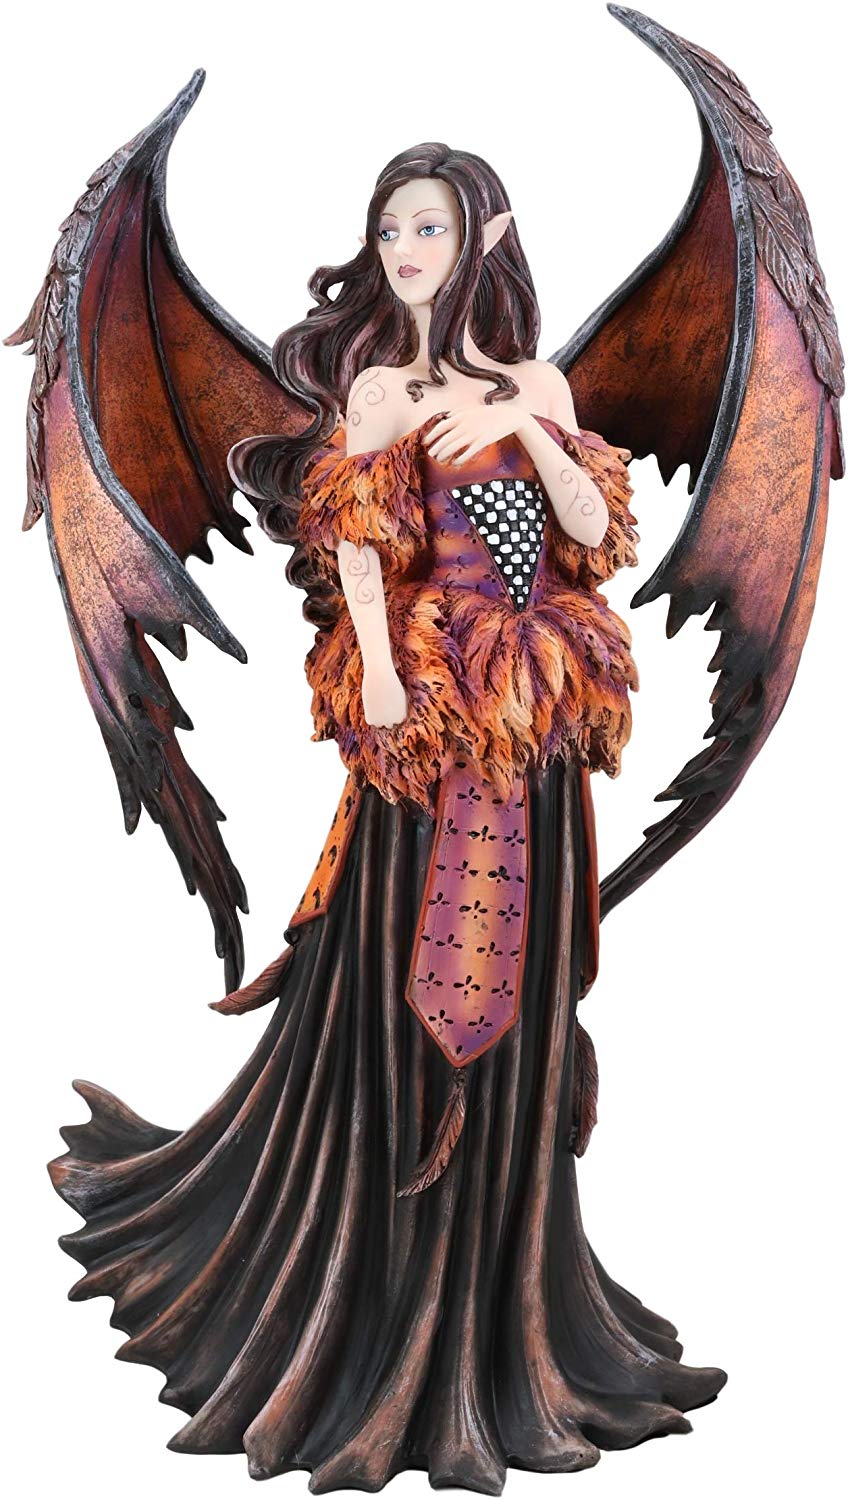 Ebros Amy Brown Large Gothic Autumn Fall Fire Bat Winged Elf Fairy Statue 17"H - image 1 of 4